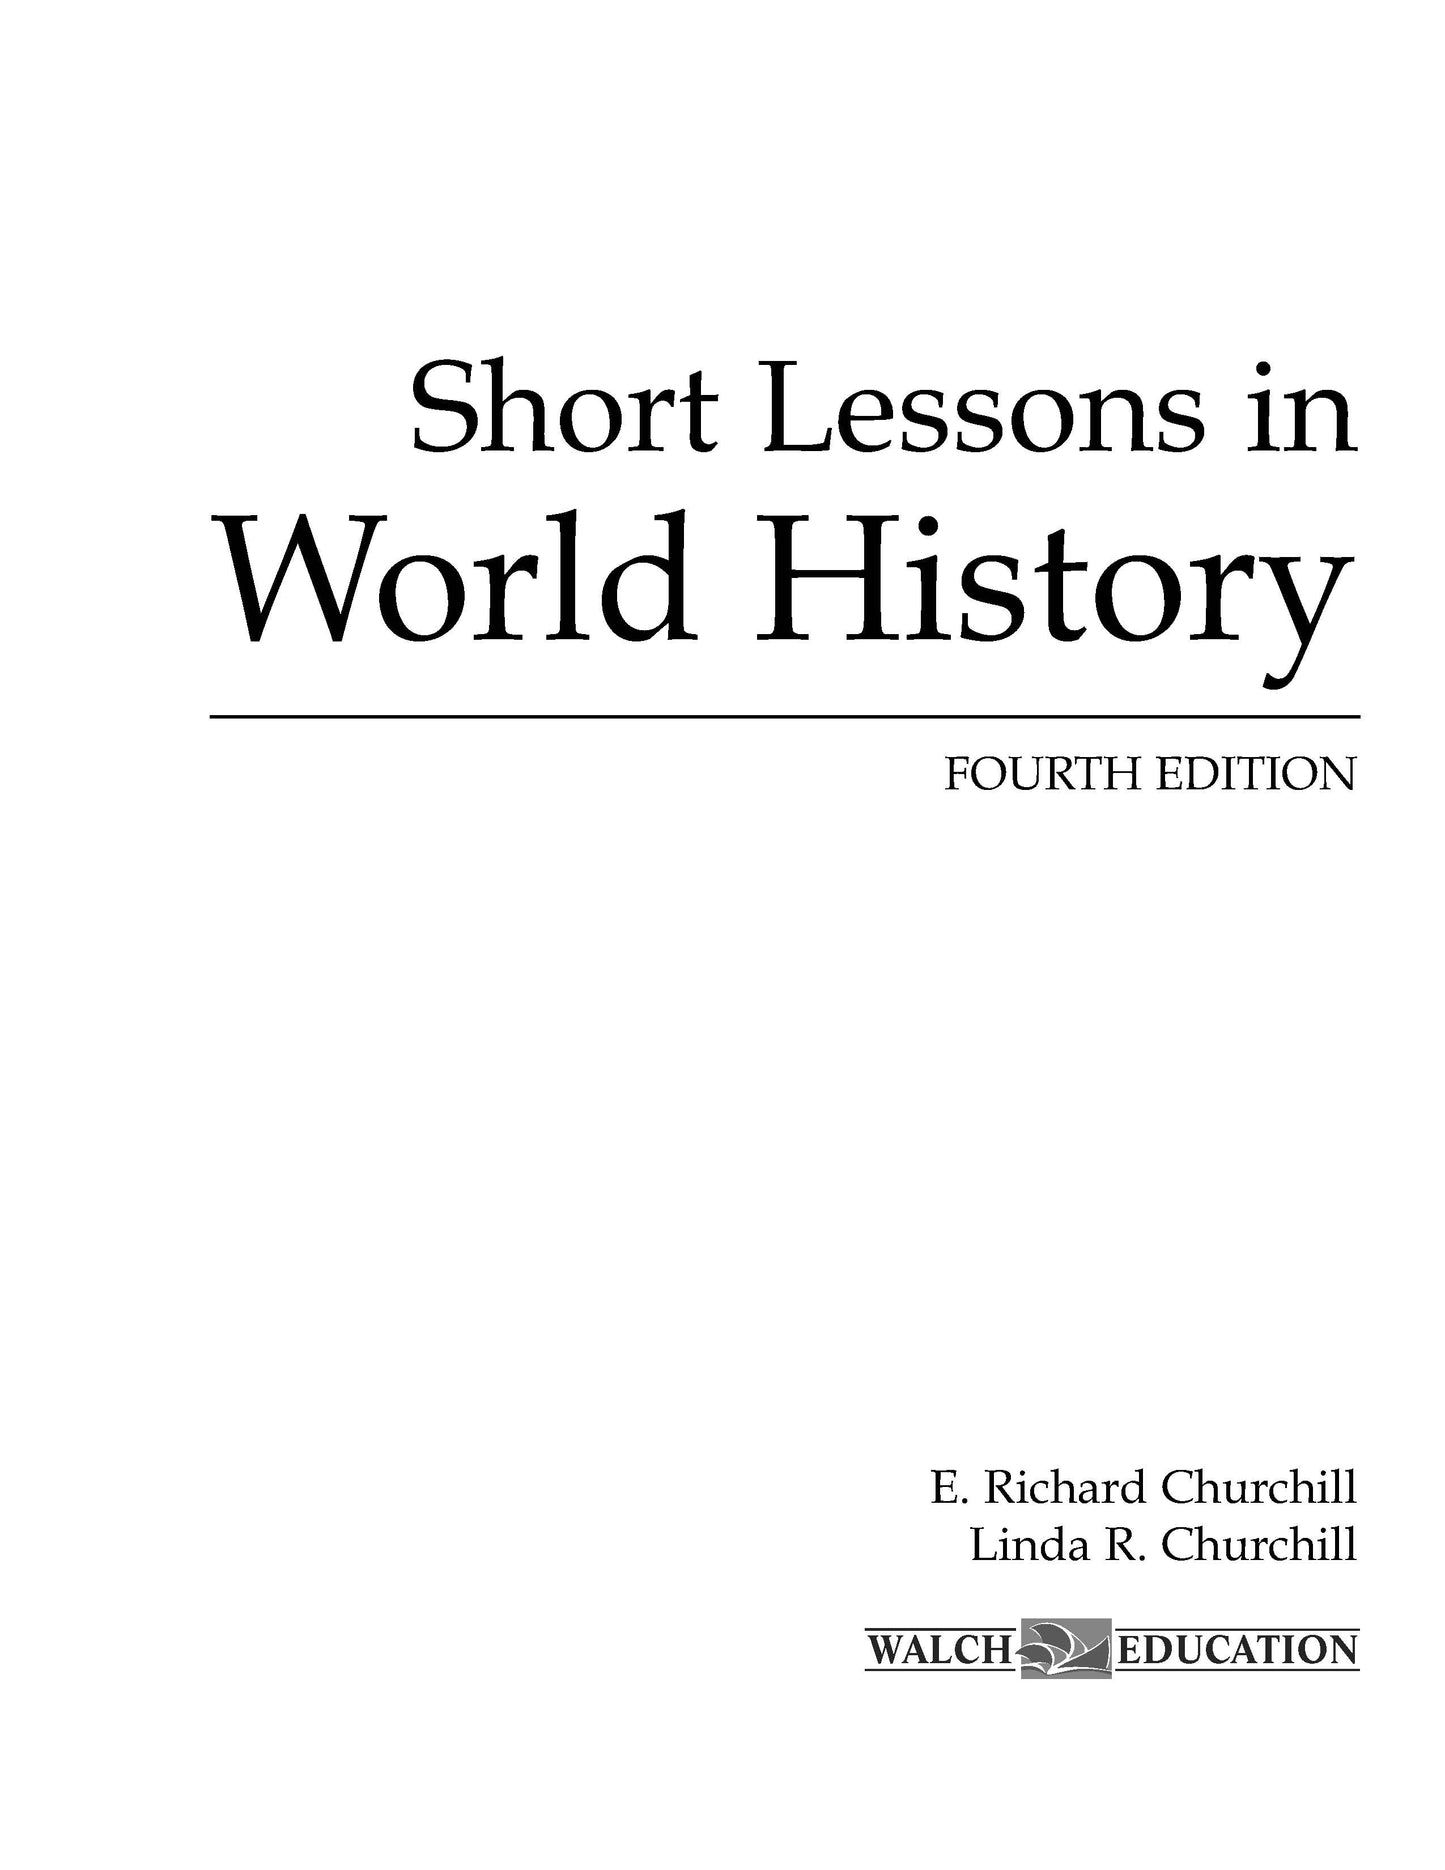 Bright Education Australia, Teacher Resources, Book, History, Short Lessons in World History Student Text   